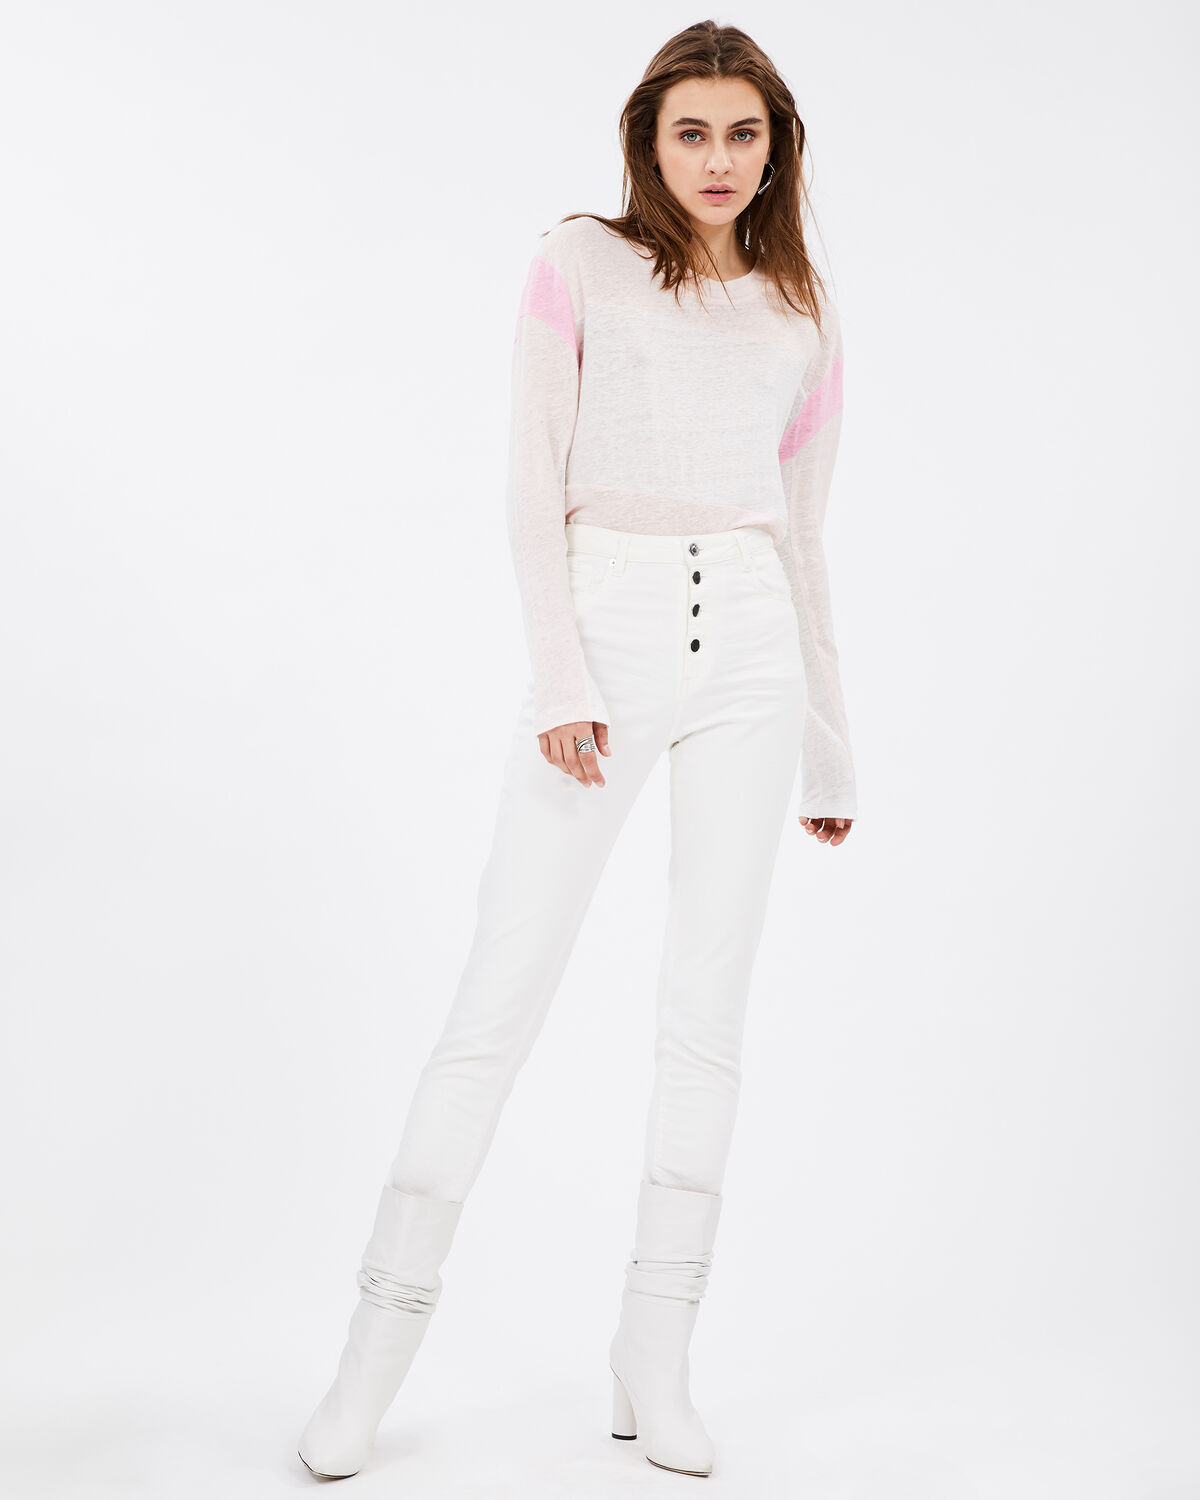 Photo of IRO Paris Sage T-Shirt Cream Pearl And Pink - Made Of Linen, This Tricolour Long-sleeved T-shirt Is A Basic Part Of The Women's Wardrobe. Slightly Transparent, It Will Bring A Touch Of Colour To Your Outfits. Wear It With White Pants For A Modern Urban Look. New In